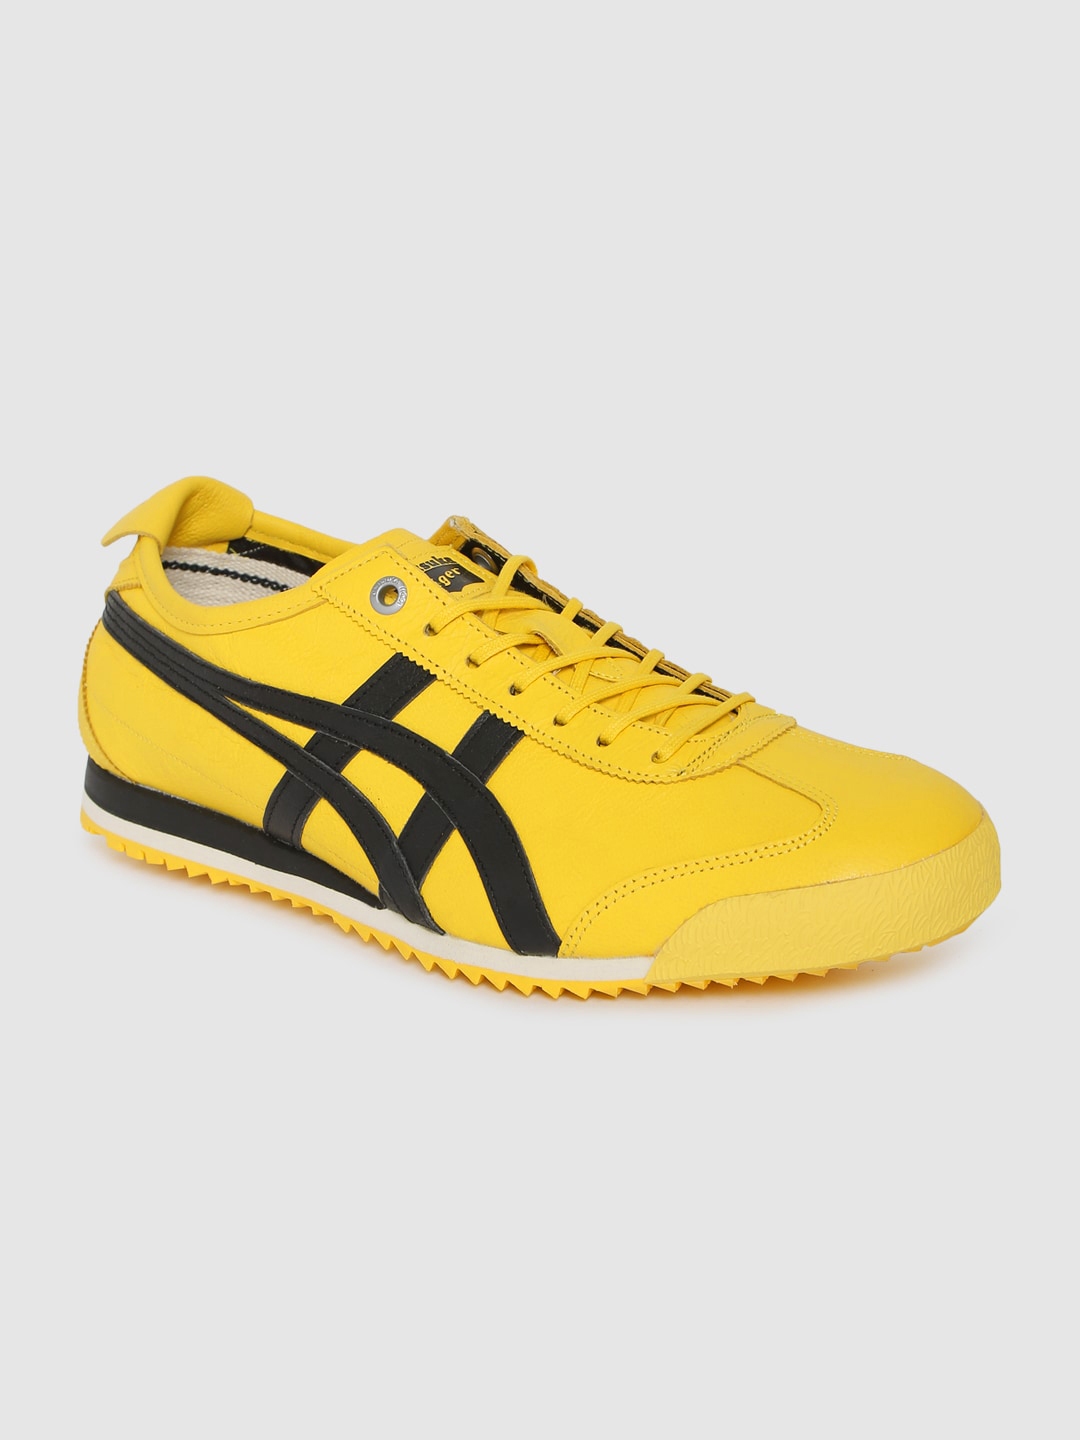 Buy Onitsuka Tiger Unisex Yellow Mexico 66 SD Sneakers - Casual Shoes ...